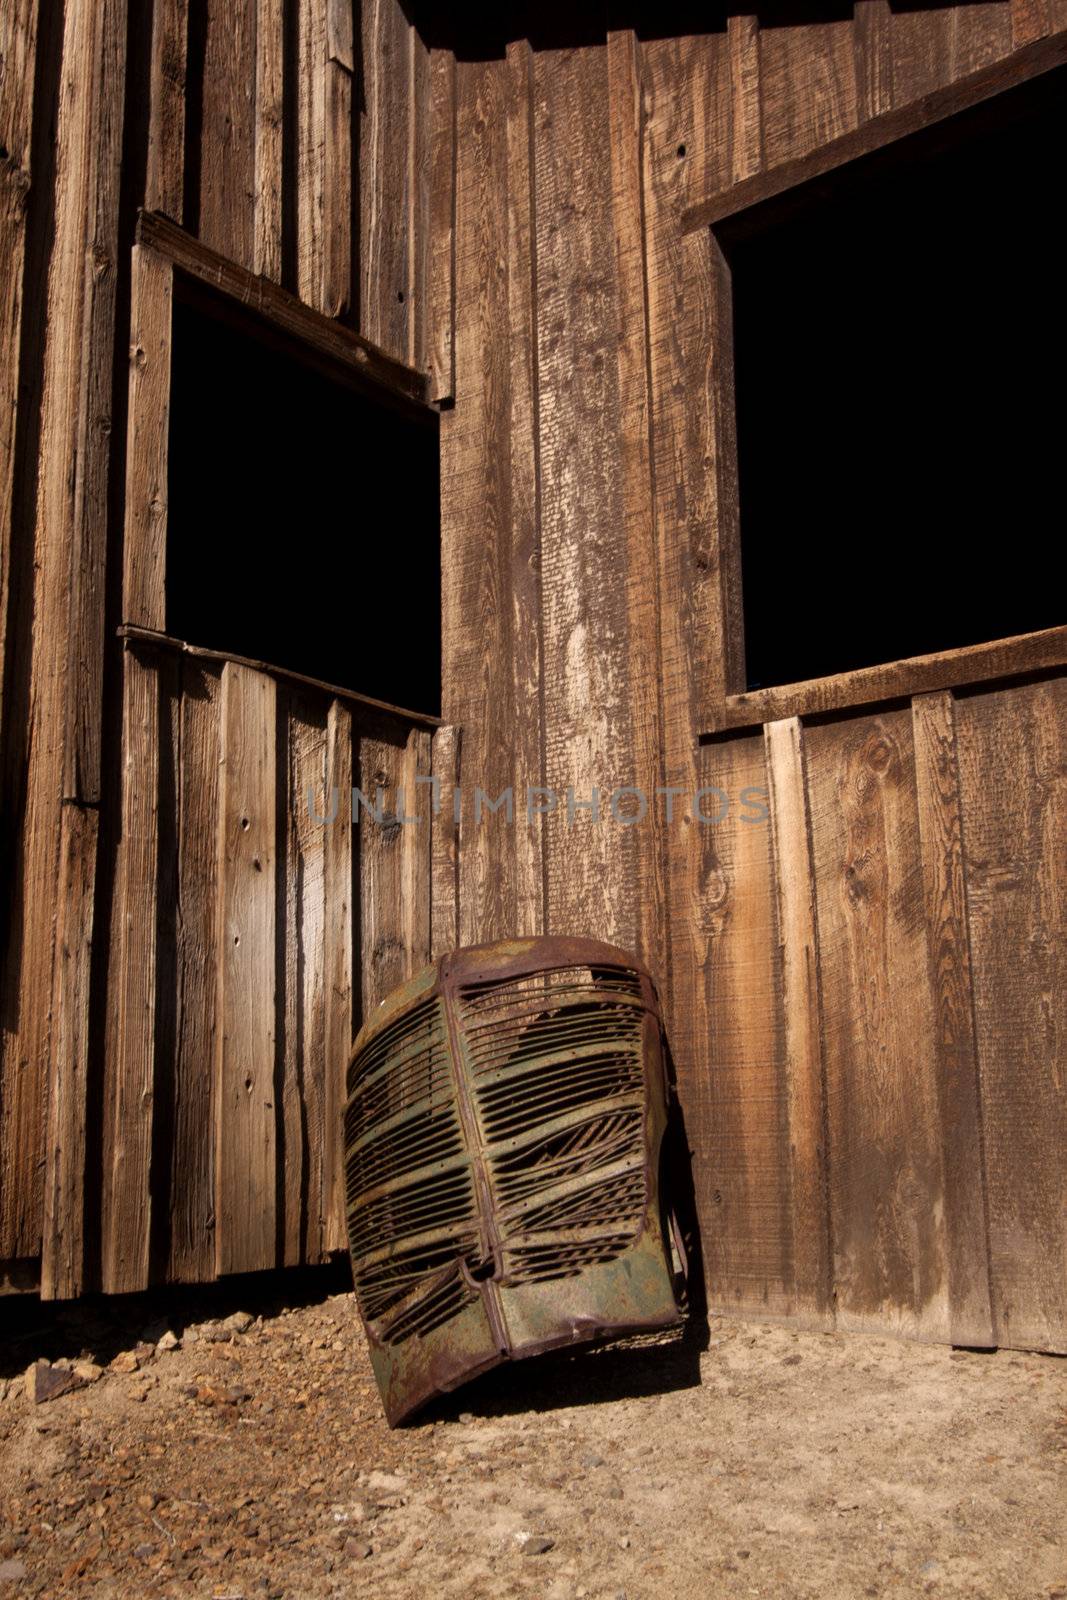 A rusty old truck grill against a barn. by jeremywhat